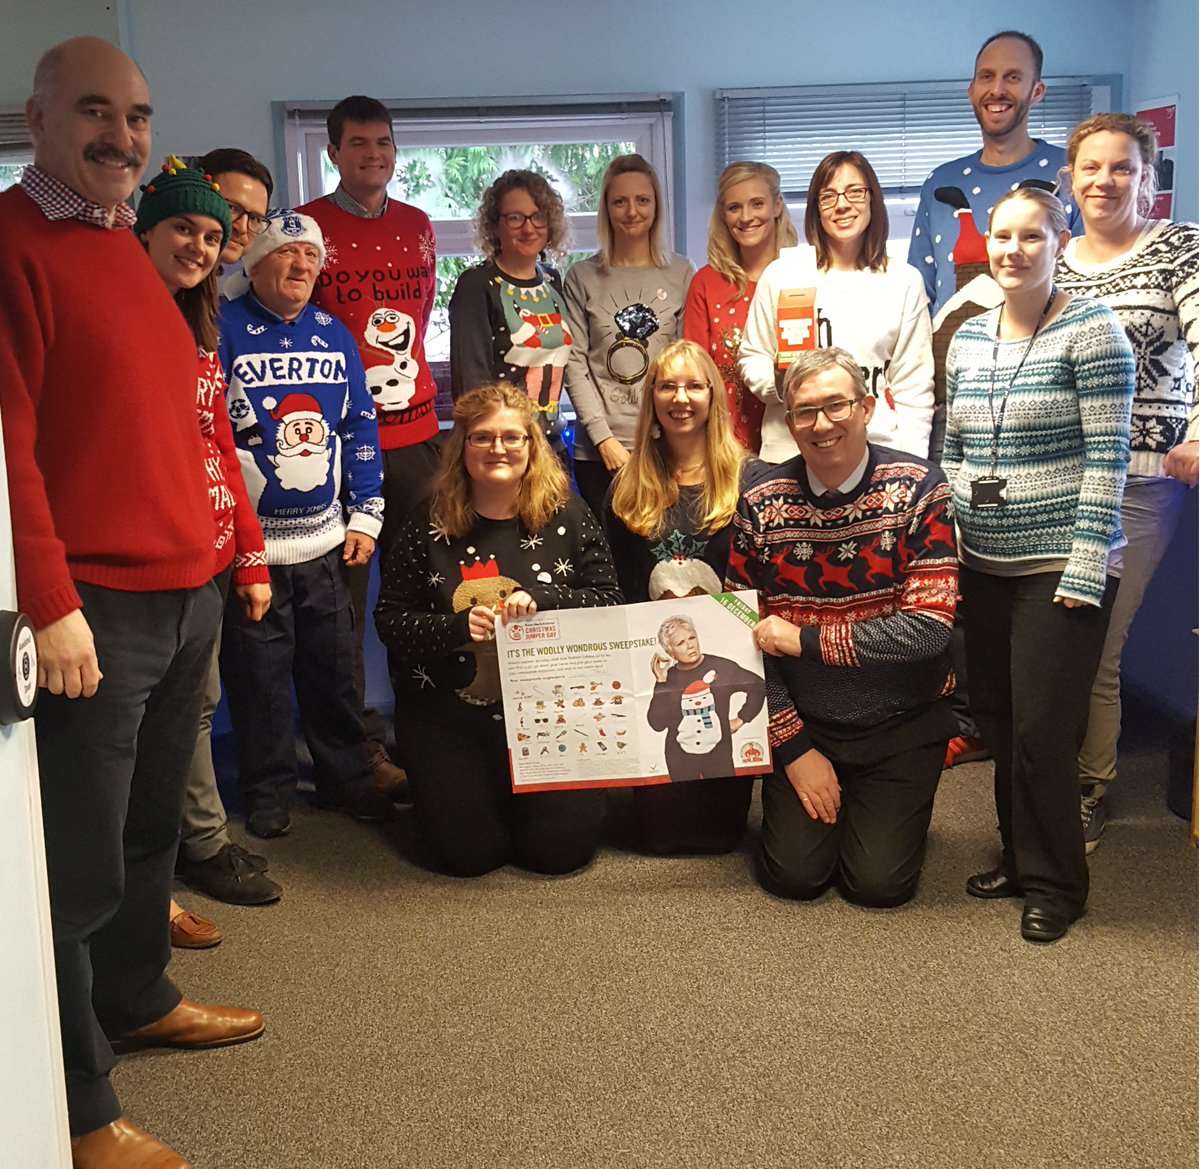 Kent hospitality staff at Uni of Kent sporting their Christmas knits